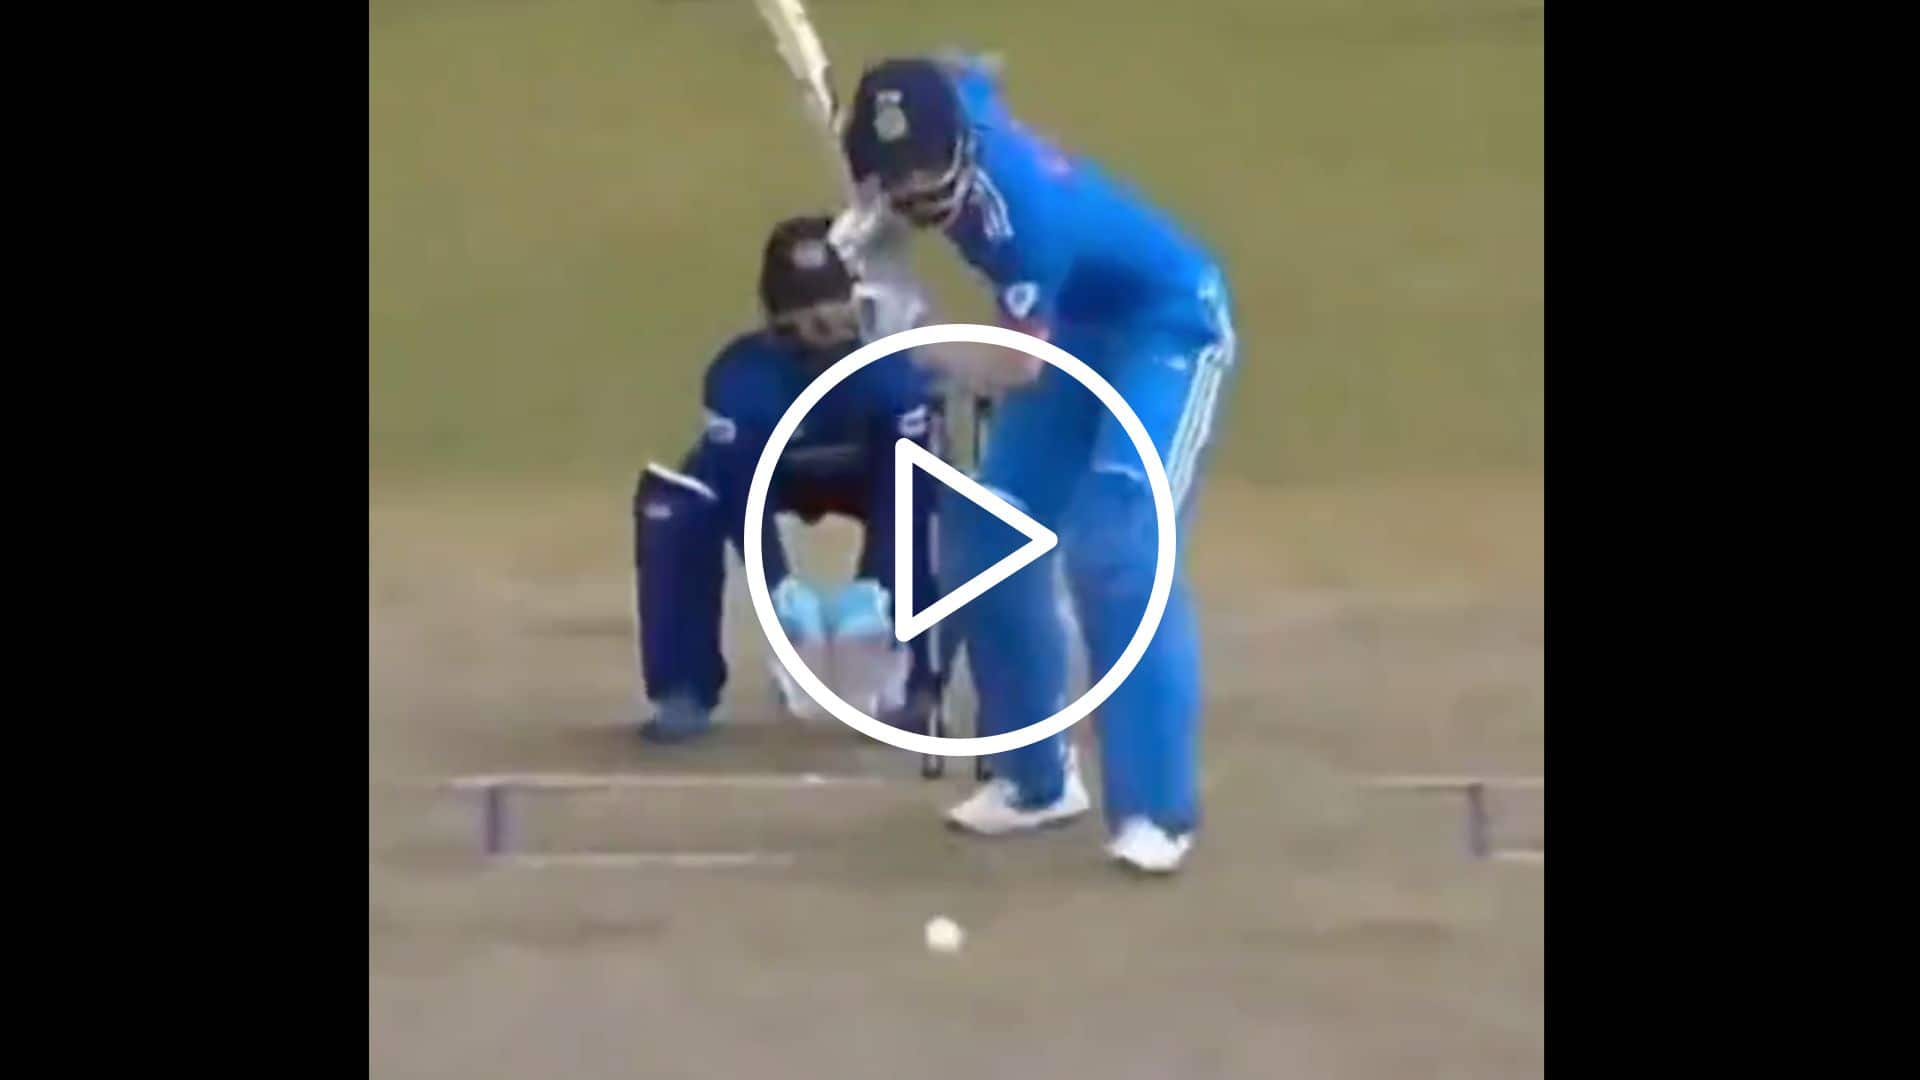 [Watch] Dunith Wellalage Outfoxes 'In Form' KL Rahul  With A Magical Delivery